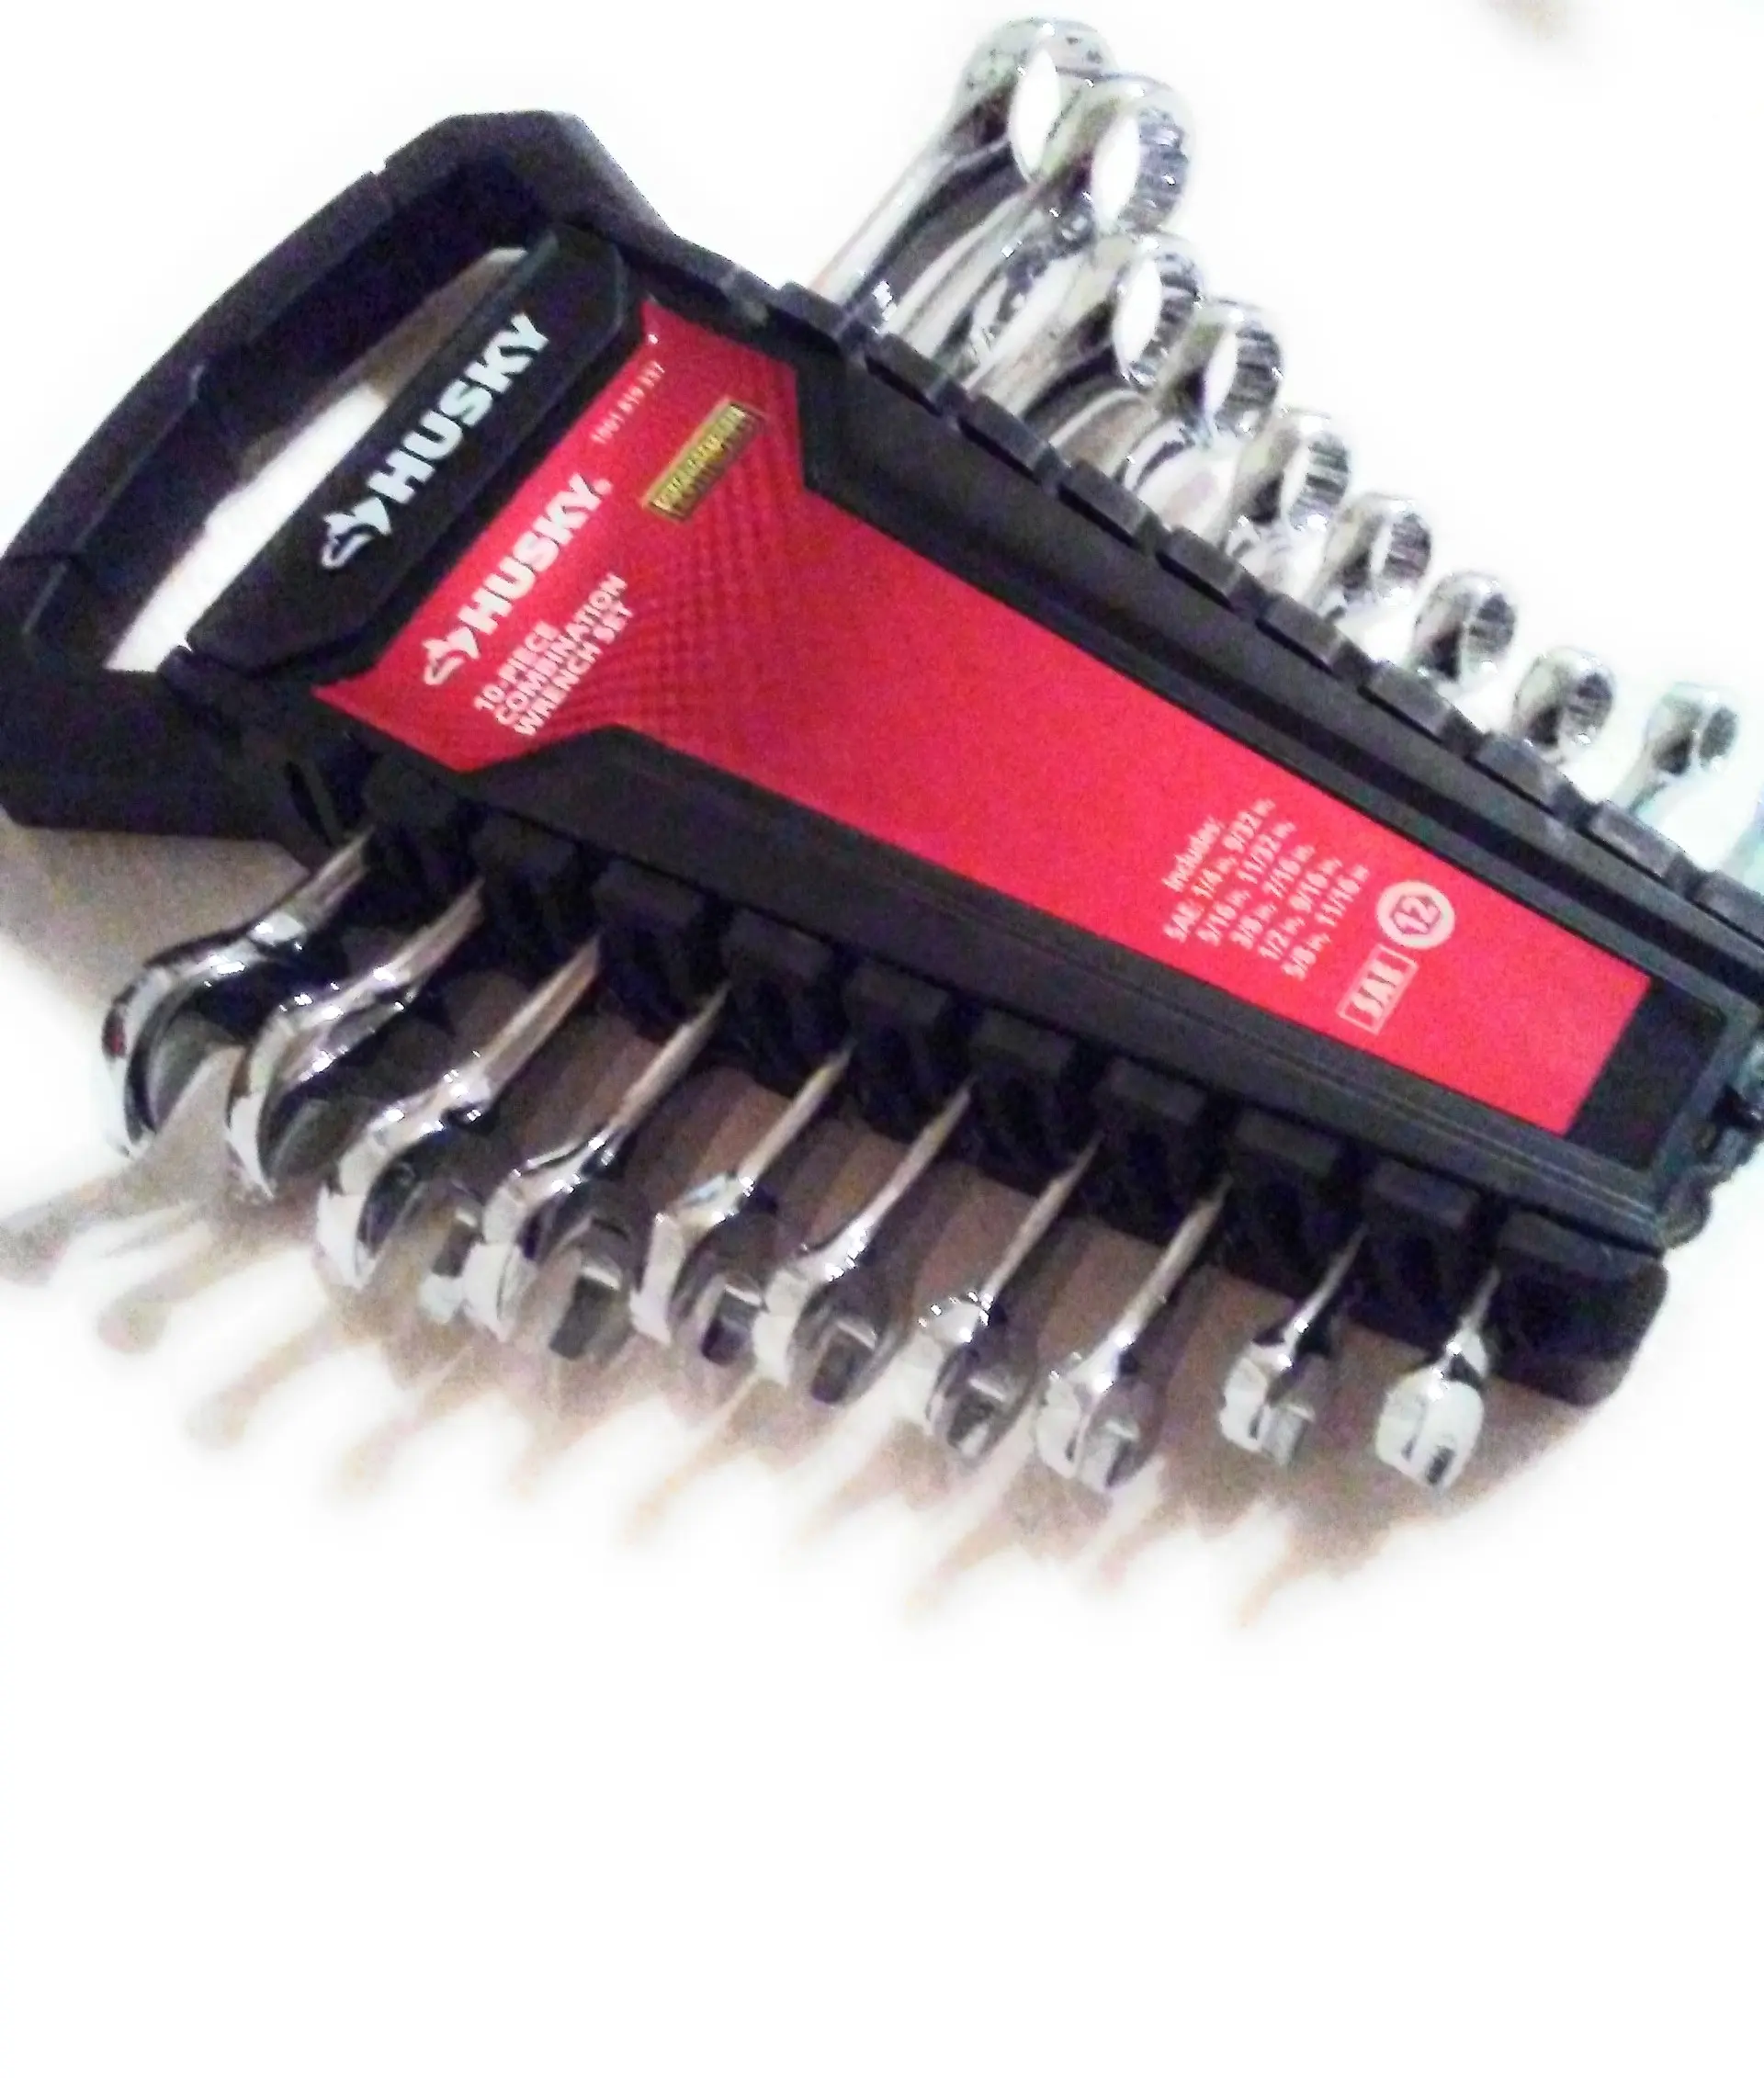 Cheap Husky Wrench Set Find Husky Wrench Set Deals On Line At